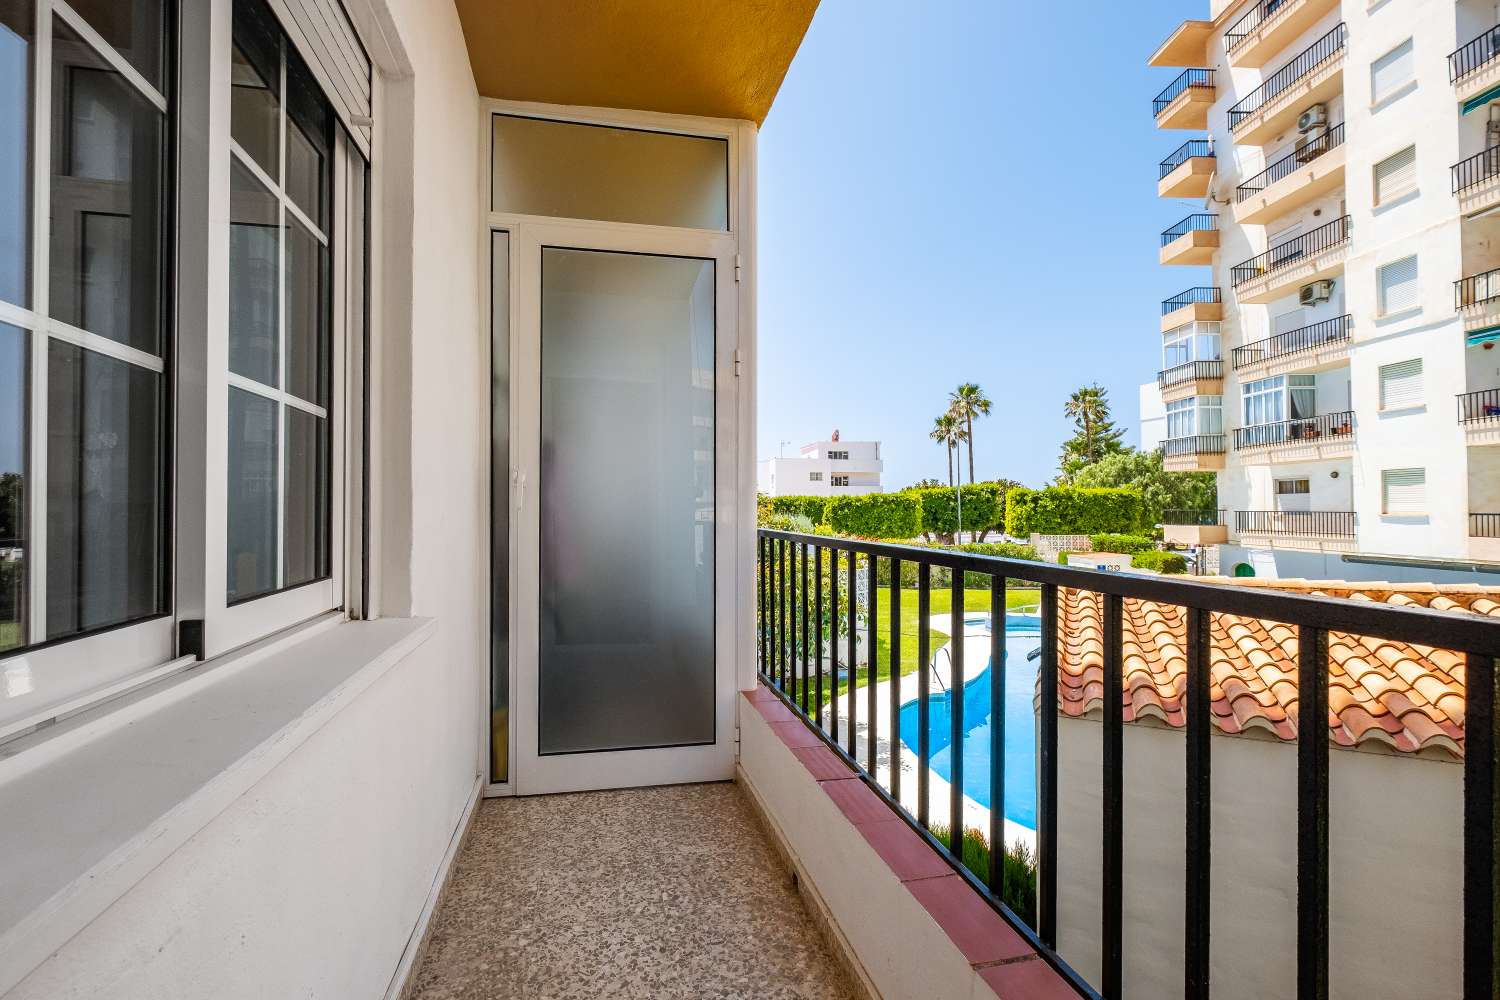 Apartment for Sale near to beach